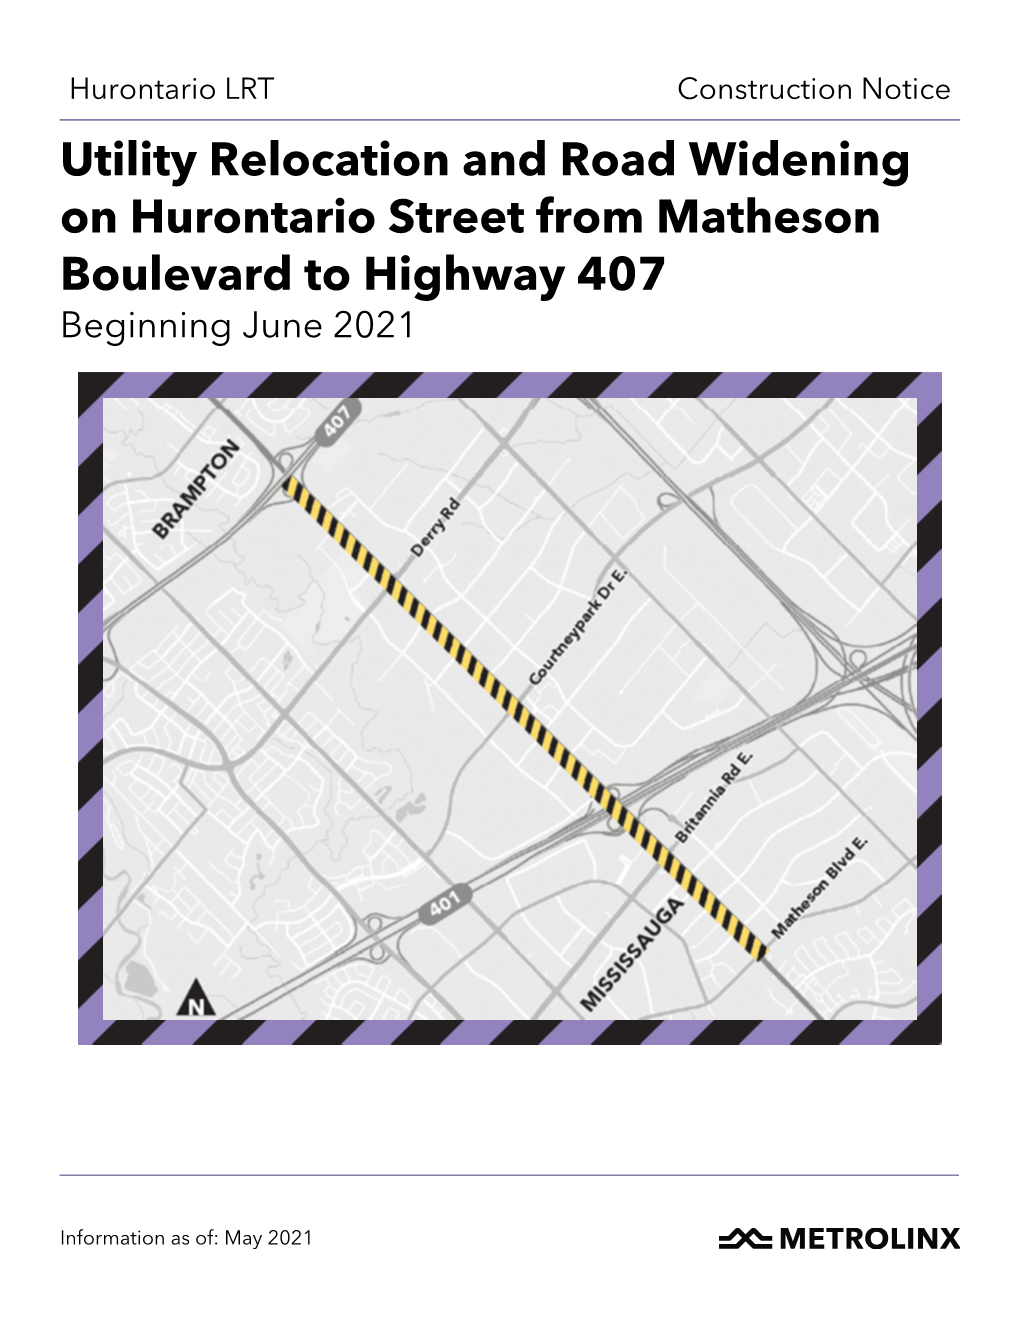 Utility Relocation and Road Widening on Hurontario Street from Matheson Boulevard to Highway 407 Beginning June 2021